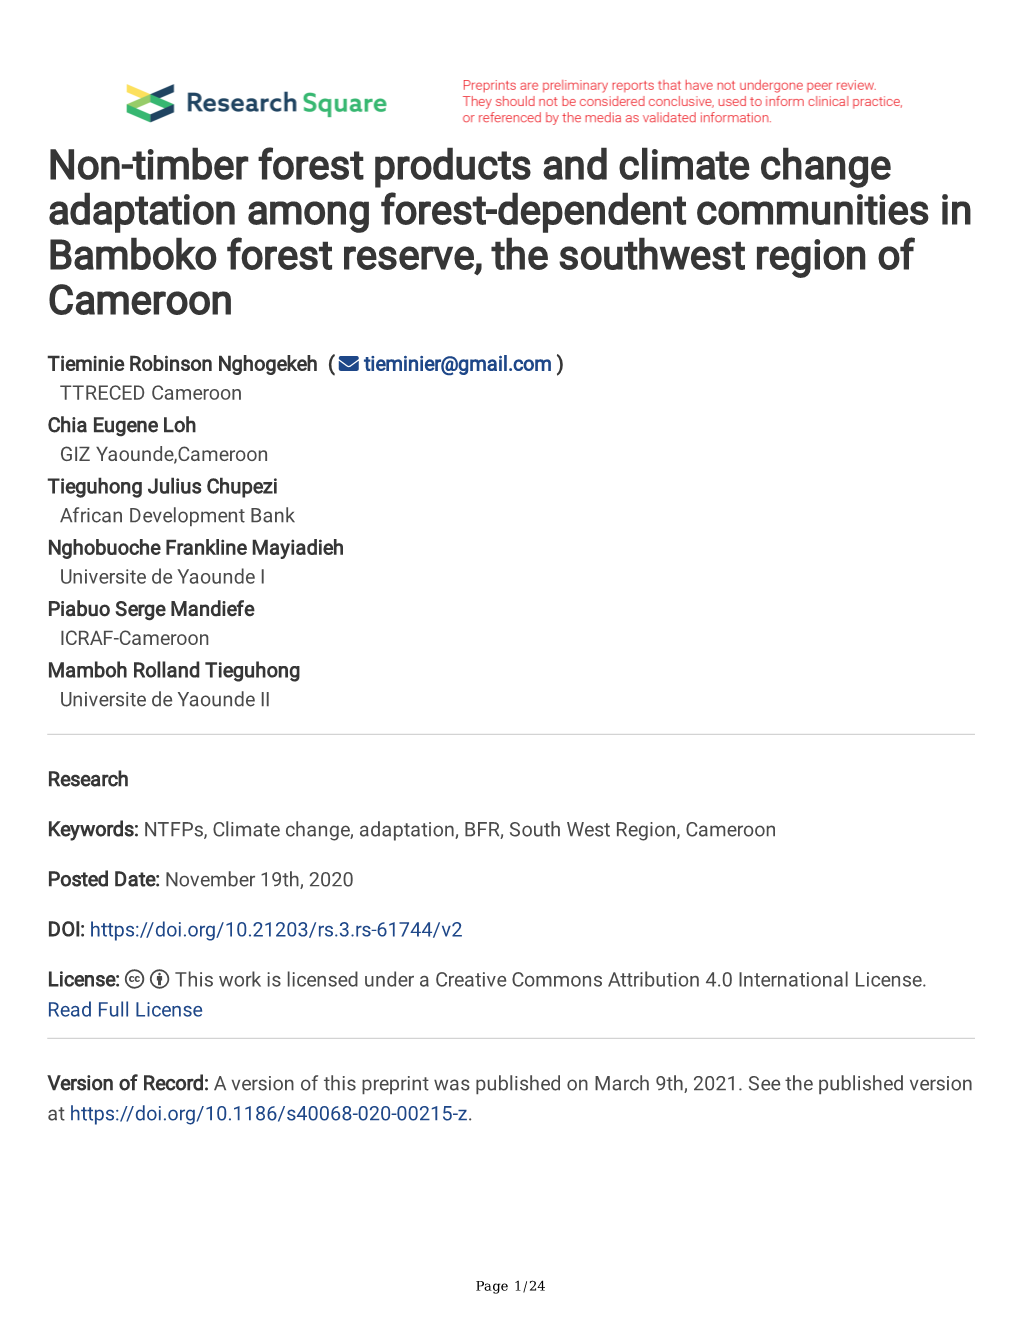 Non-Timber Forest Products and Climate Change Adaptation Among Forest-Dependent Communities in Bamboko Forest Reserve, the Southwest Region of Cameroon